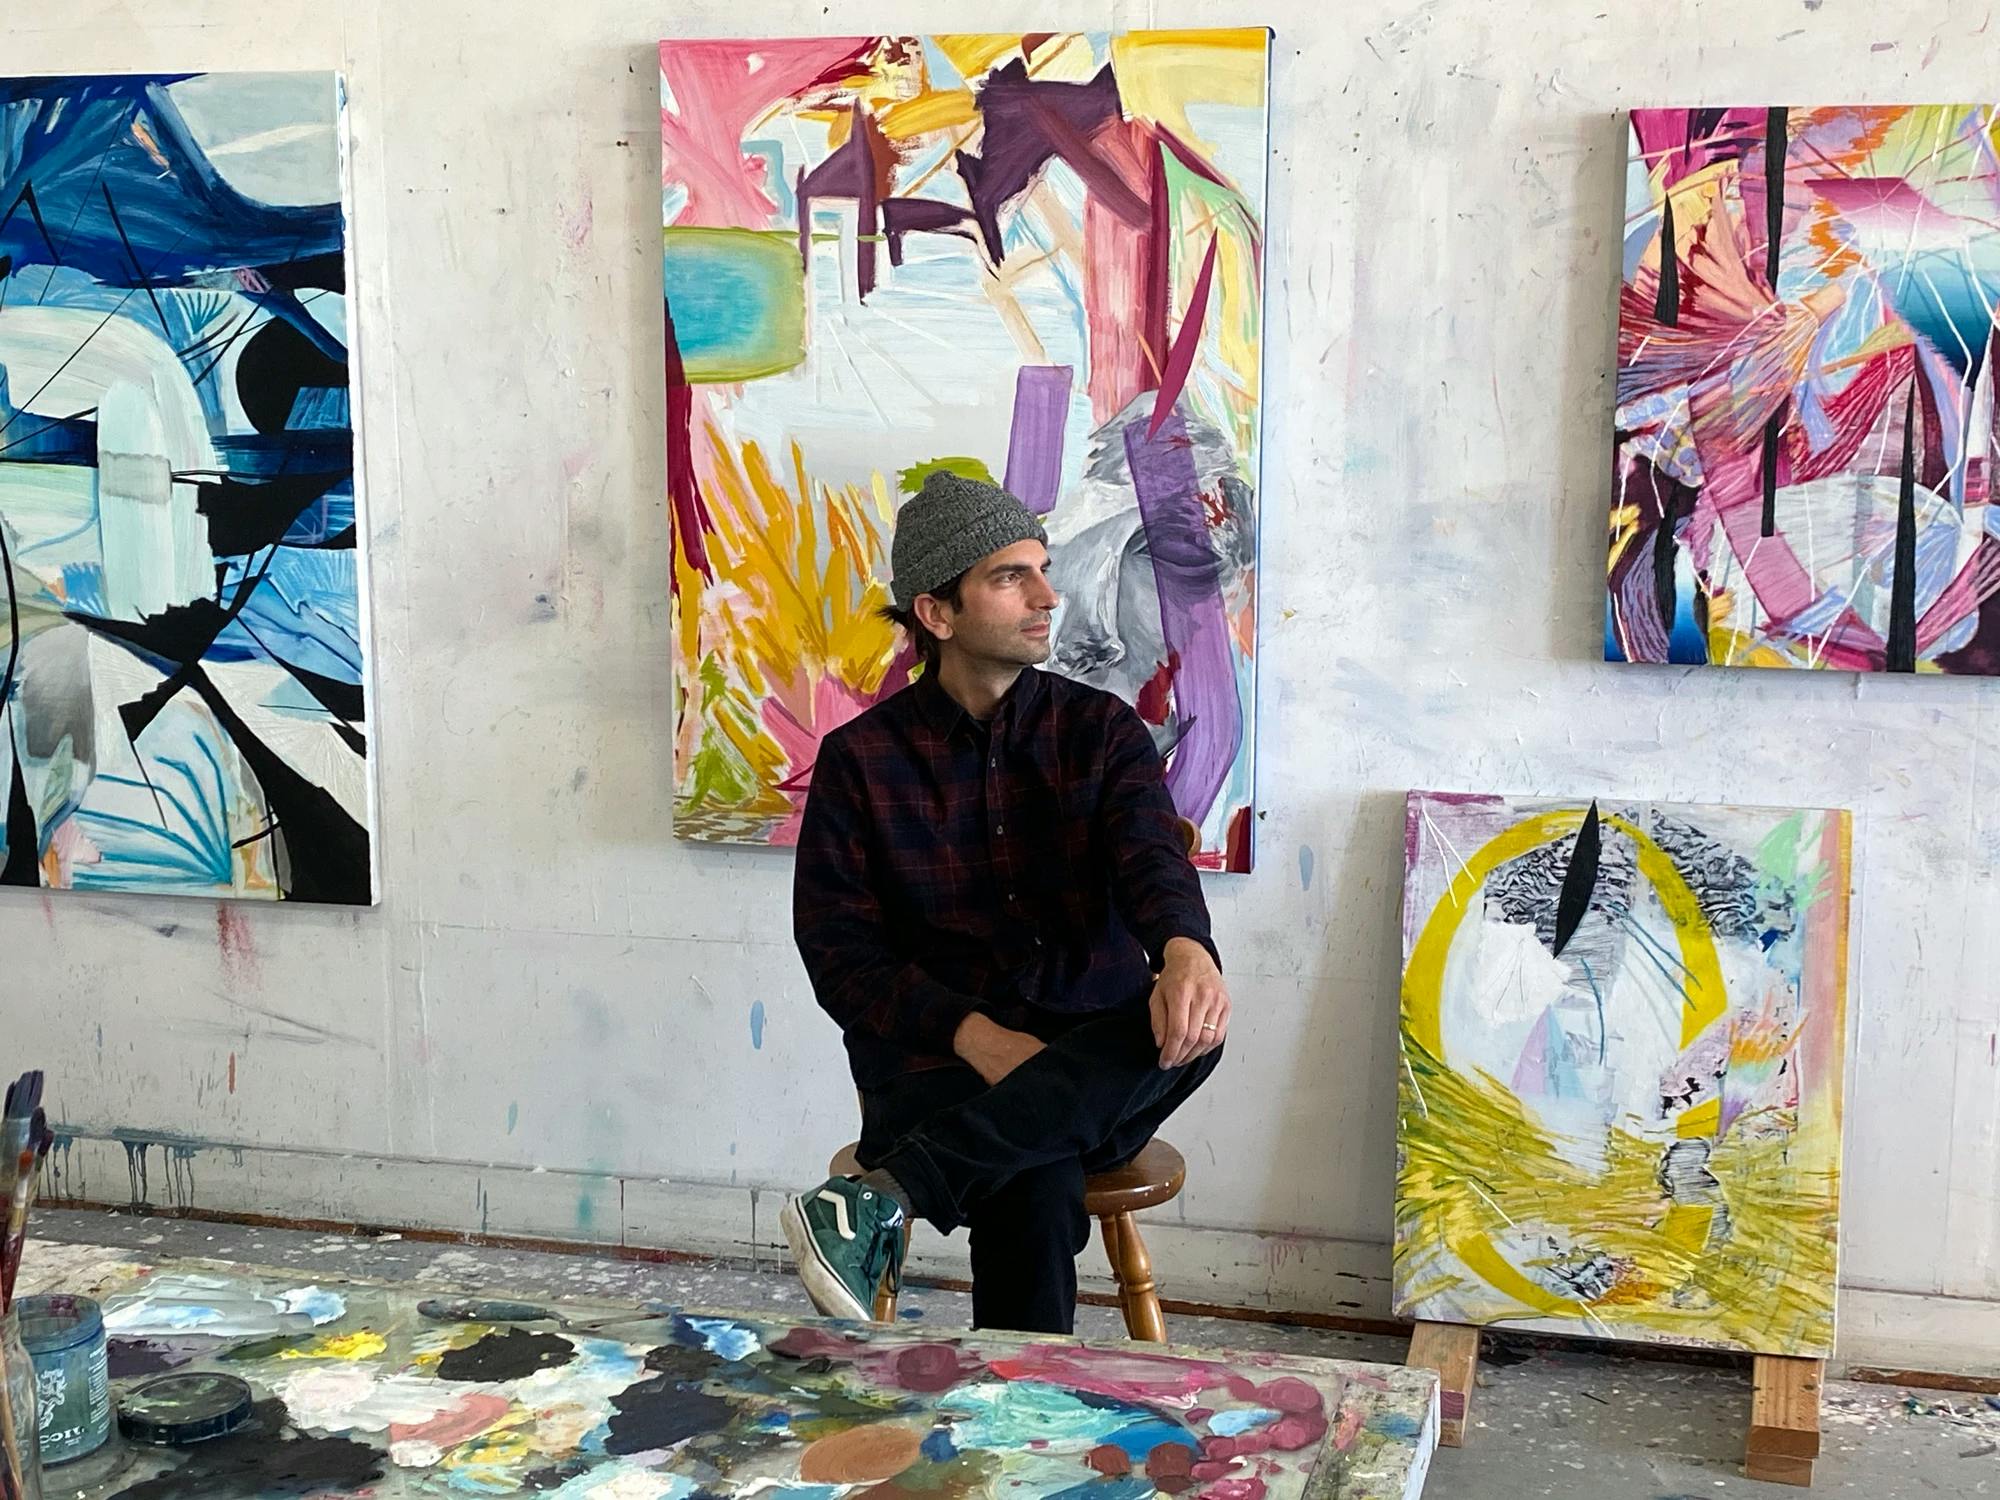 Artist Tyler Scheidt sitting on a stool in his studio surrounded by his abstract, colorful paintings.